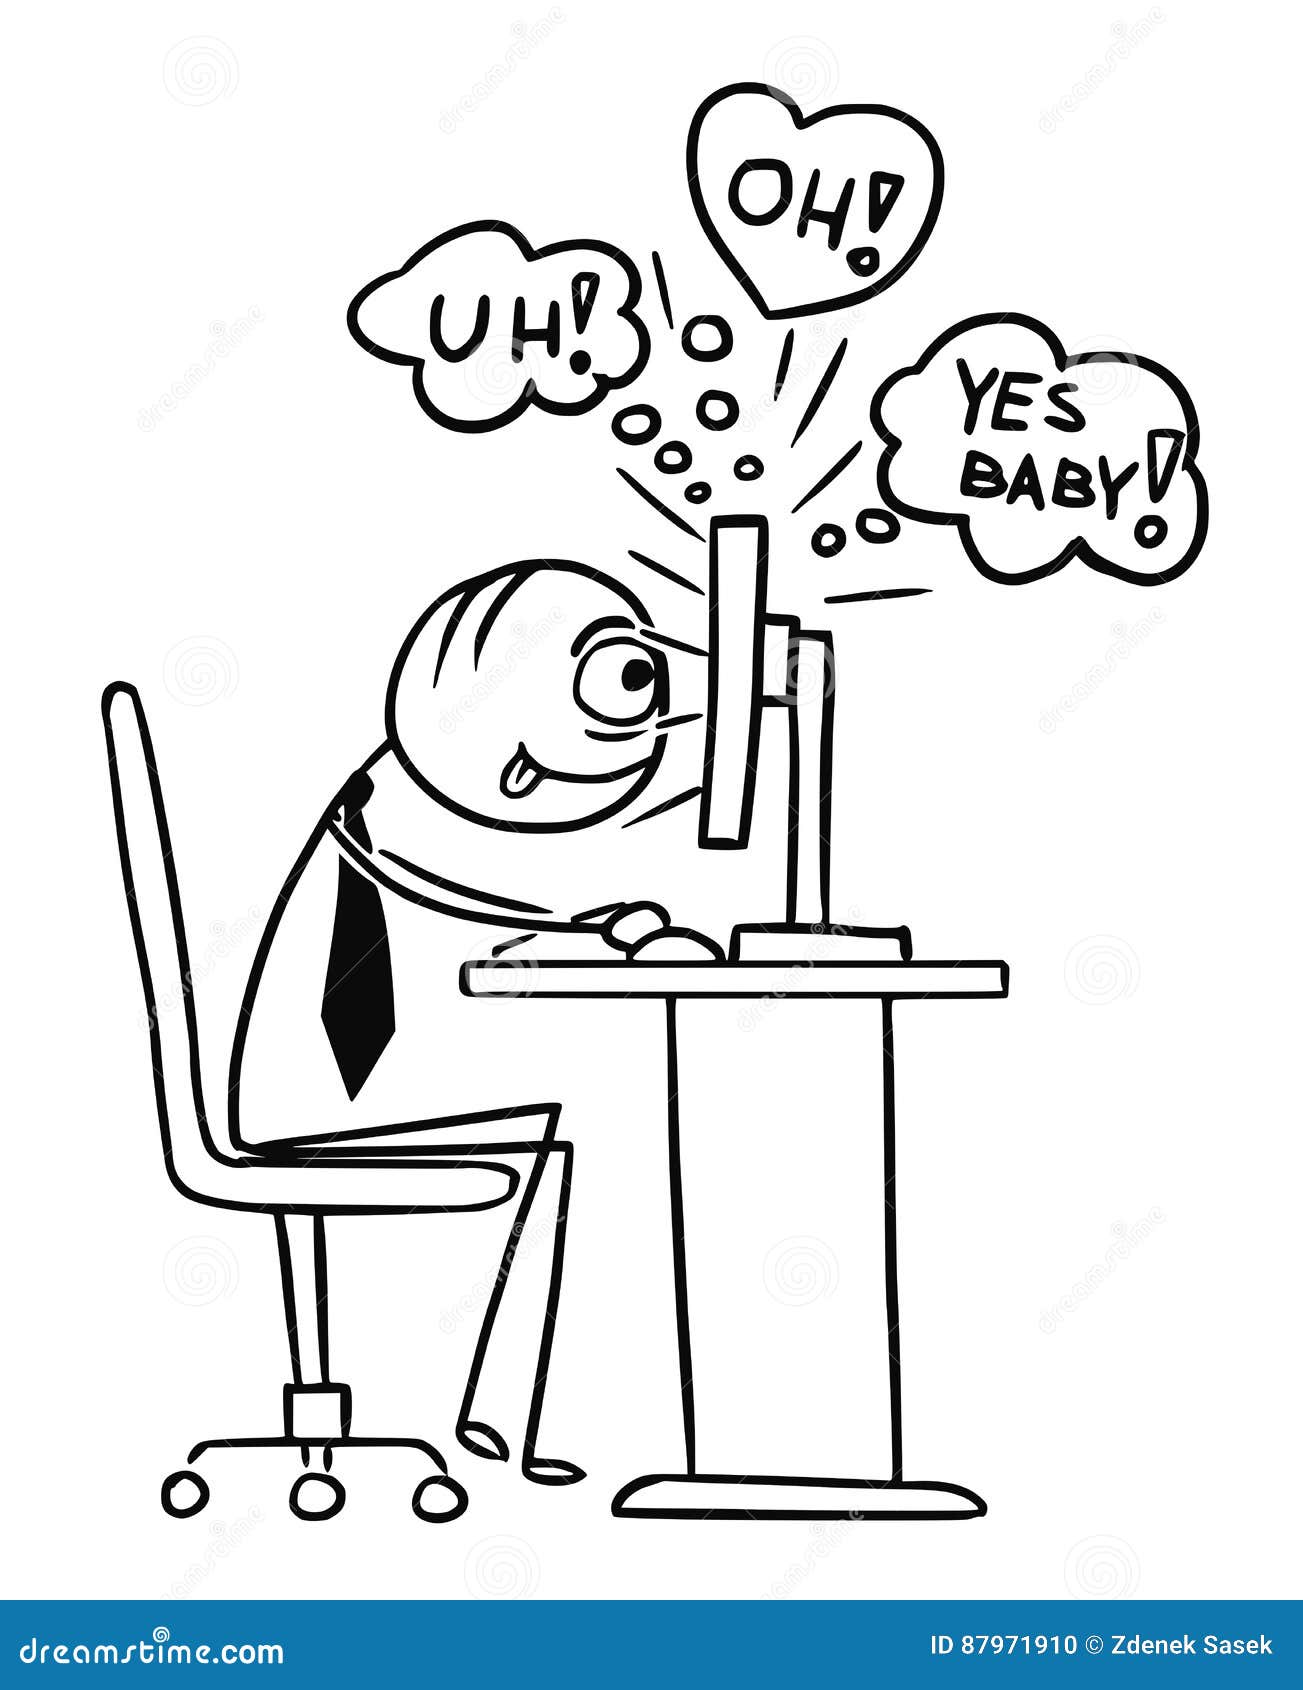 1148px x 1300px - Cartoon Of Man Watching A Porn,Pornography, Sexual Video ...